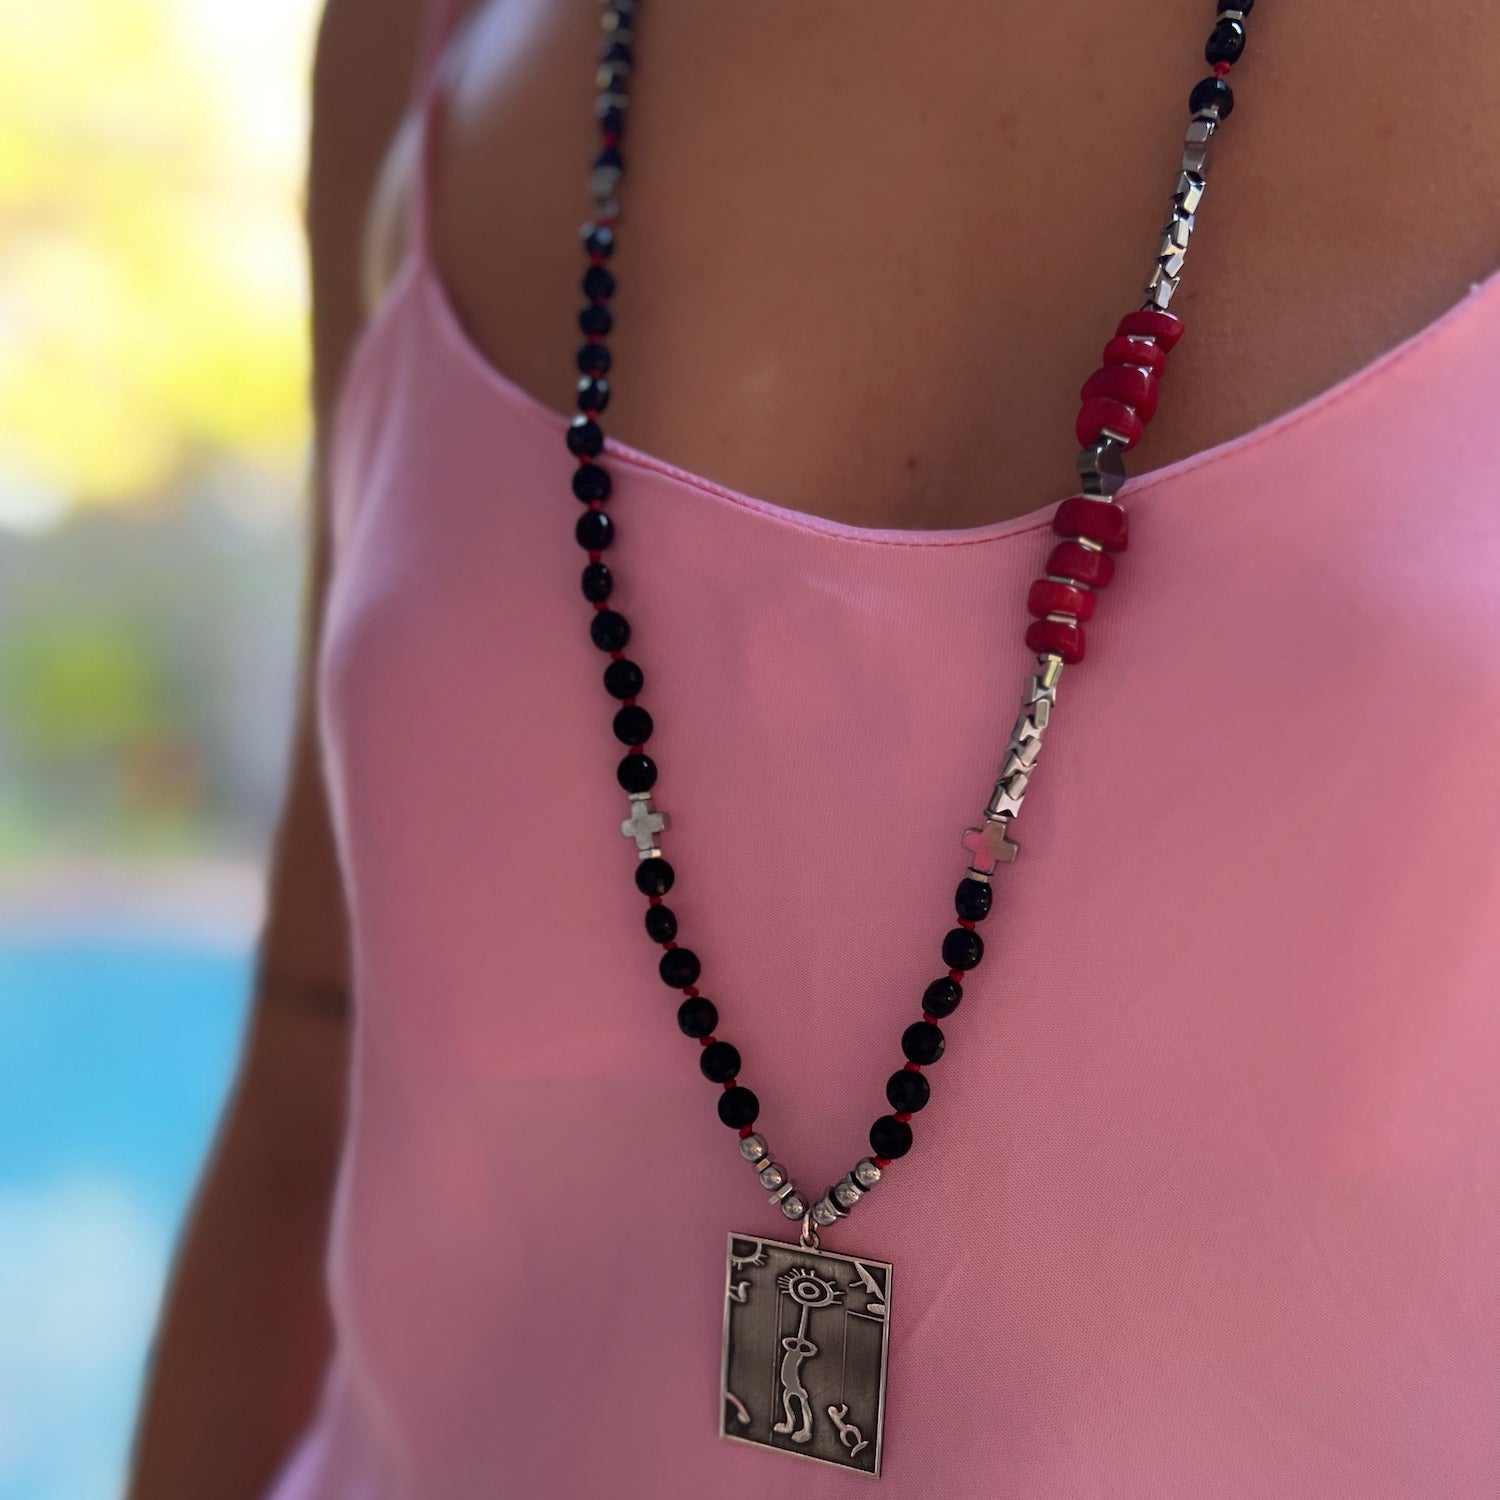 Elevate your style with the Onyx and Red Coral Necklace - as seen on our model.